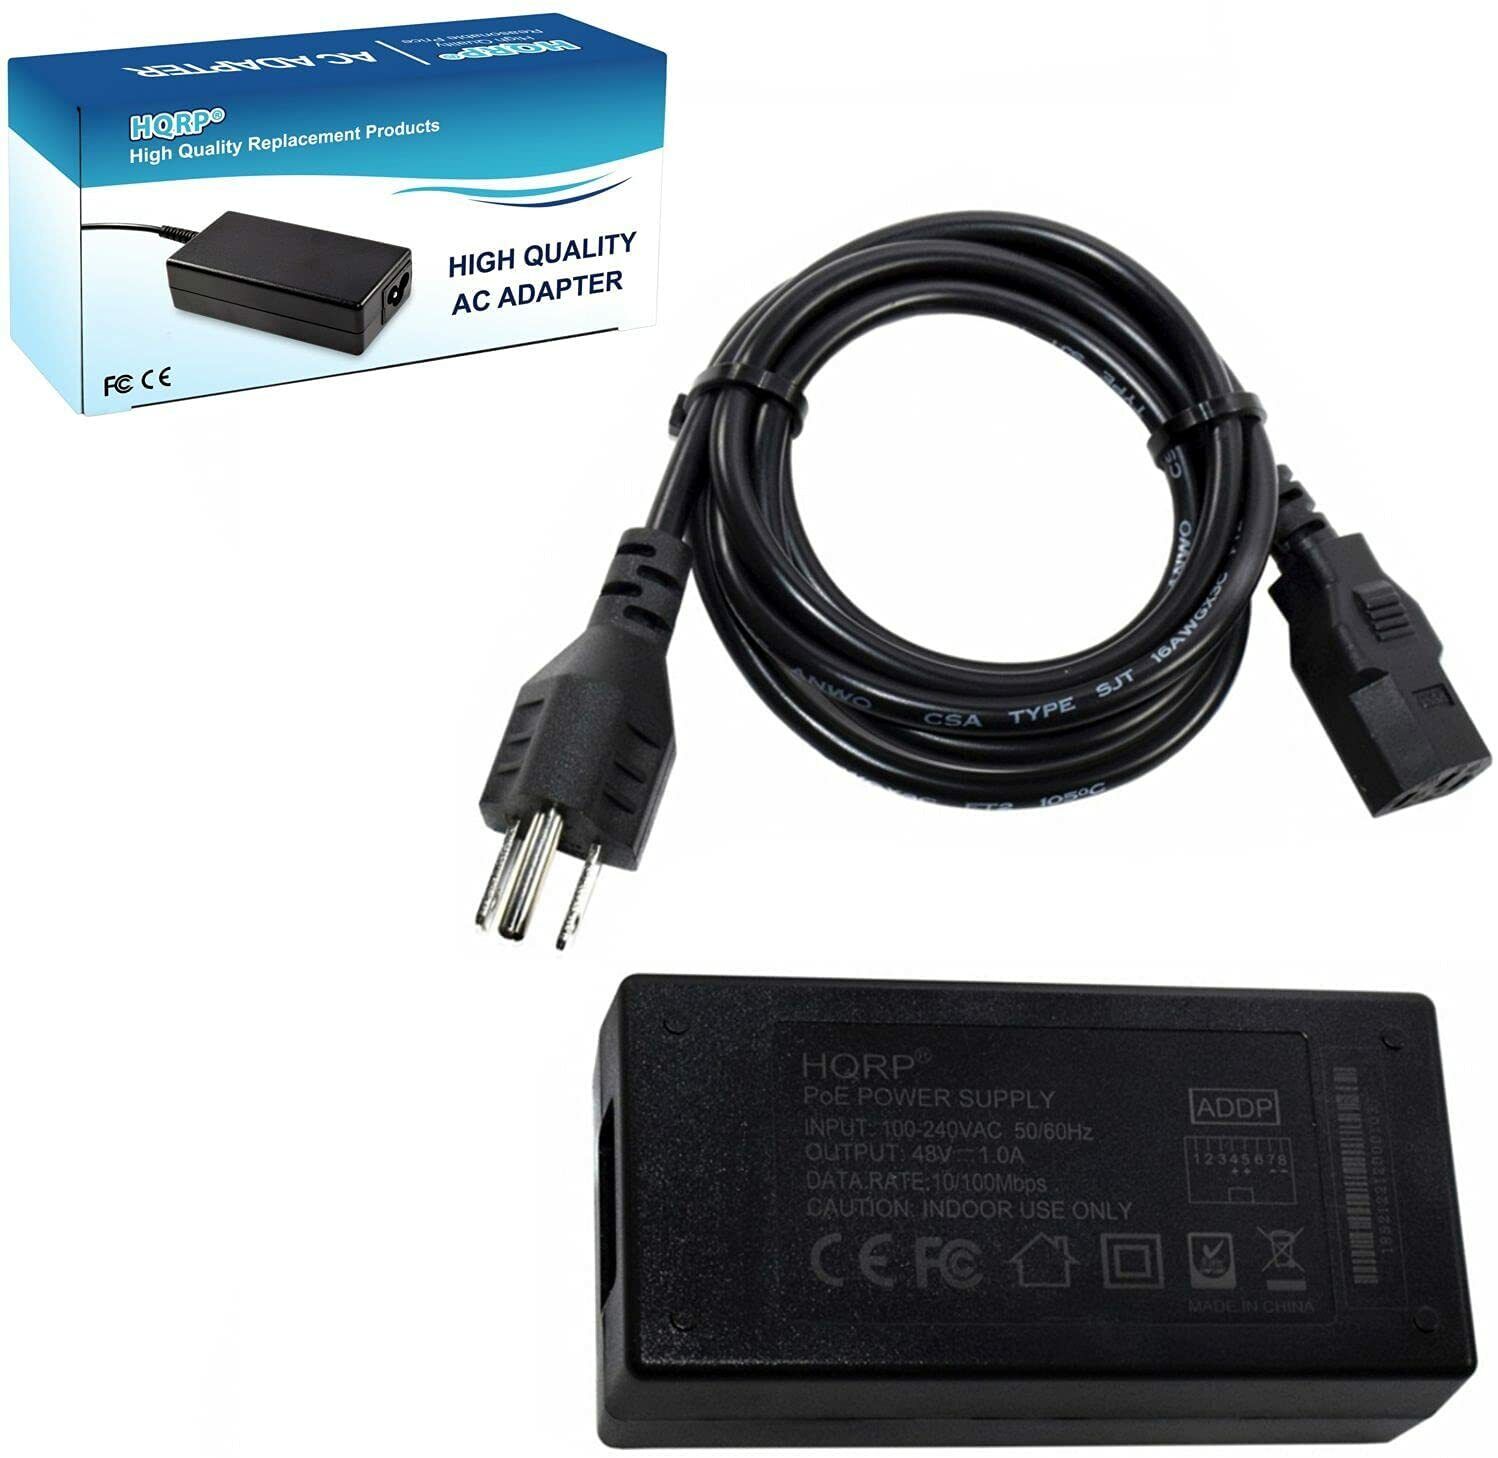 HQRP 48V POE Injector IEEE 802.3AT for Mitel 5230, 5230e, 5330 IP Phone